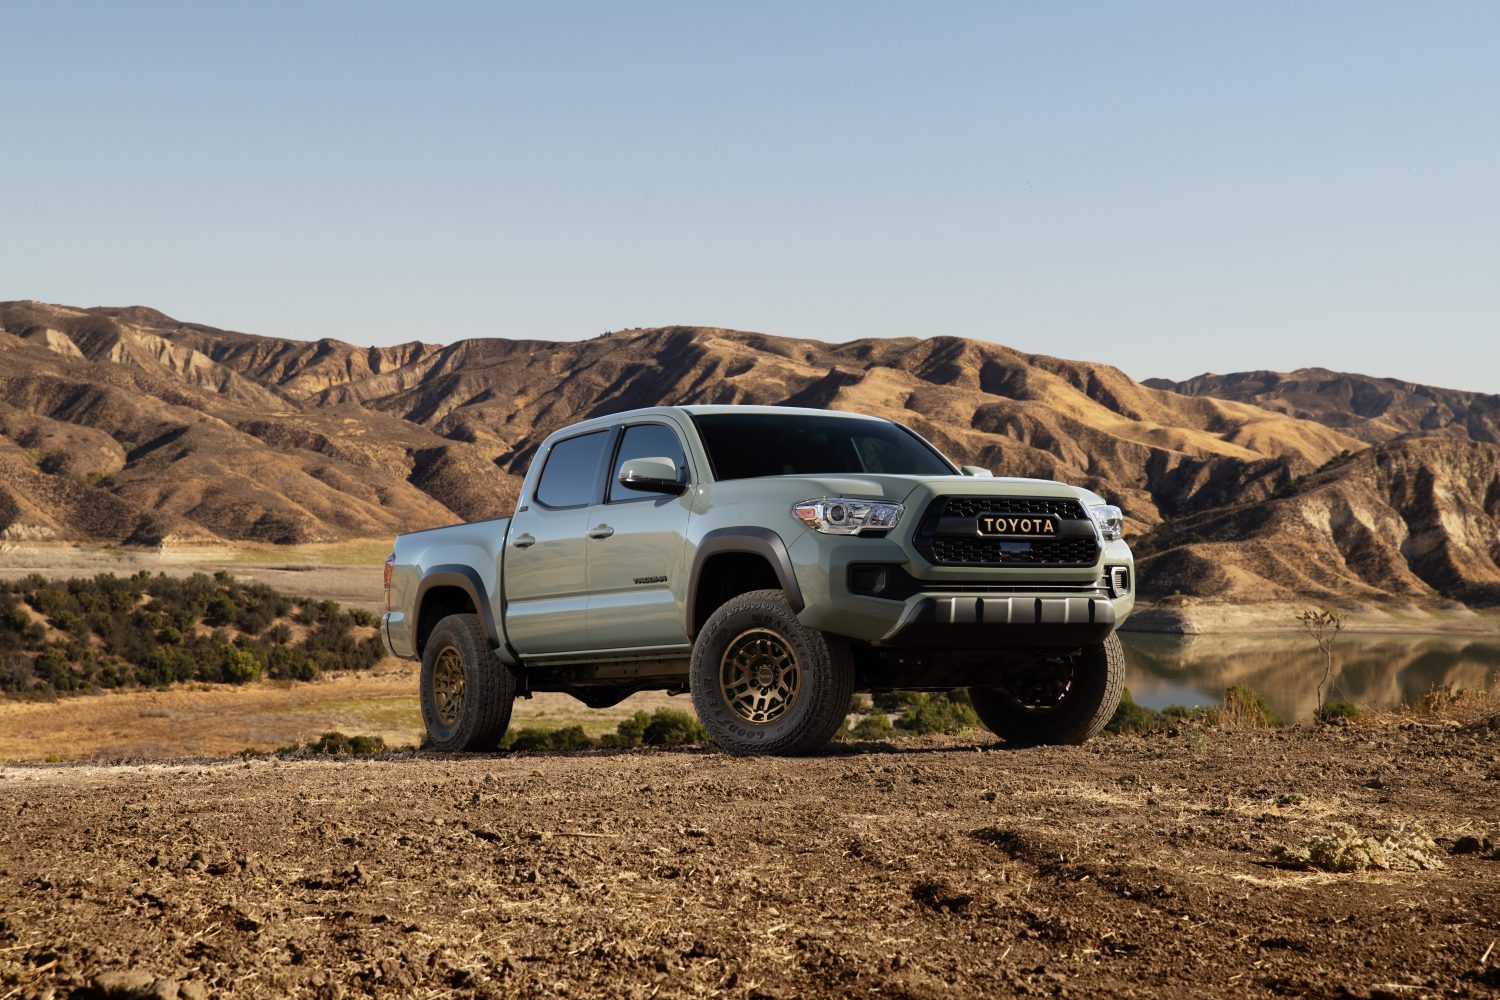 The 2022 Toyota Tacoma in the dirt